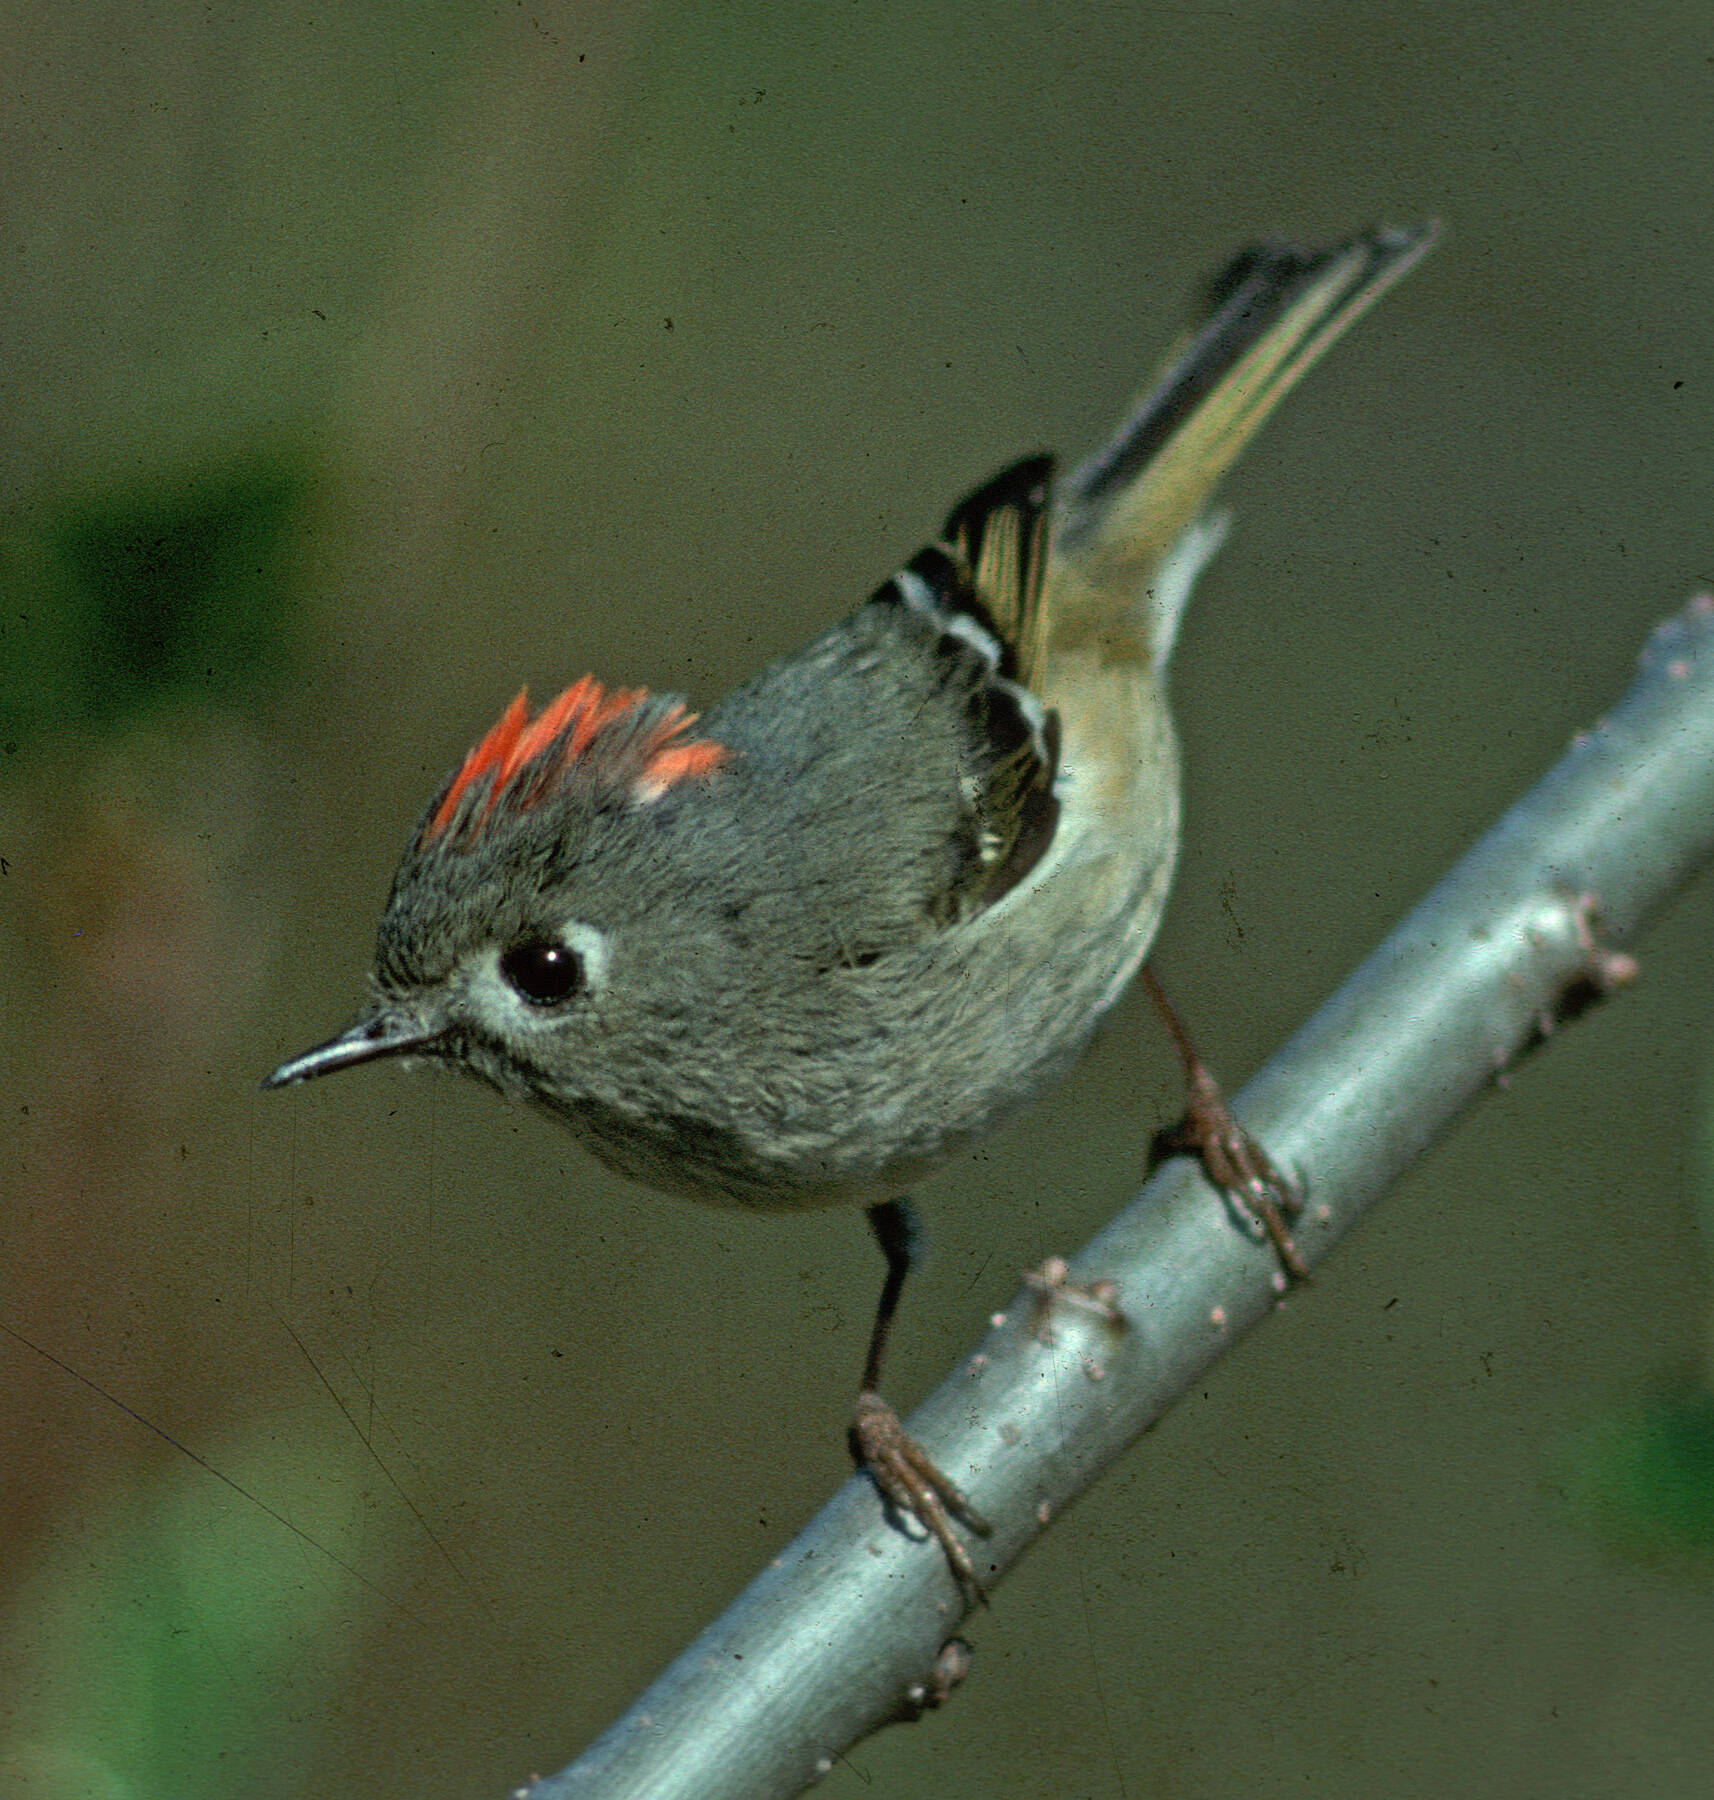 Ruby-crowned kinglets are singing, a signal that spring may really have arrived. (Courtesy Photo / Bob Armstrong)